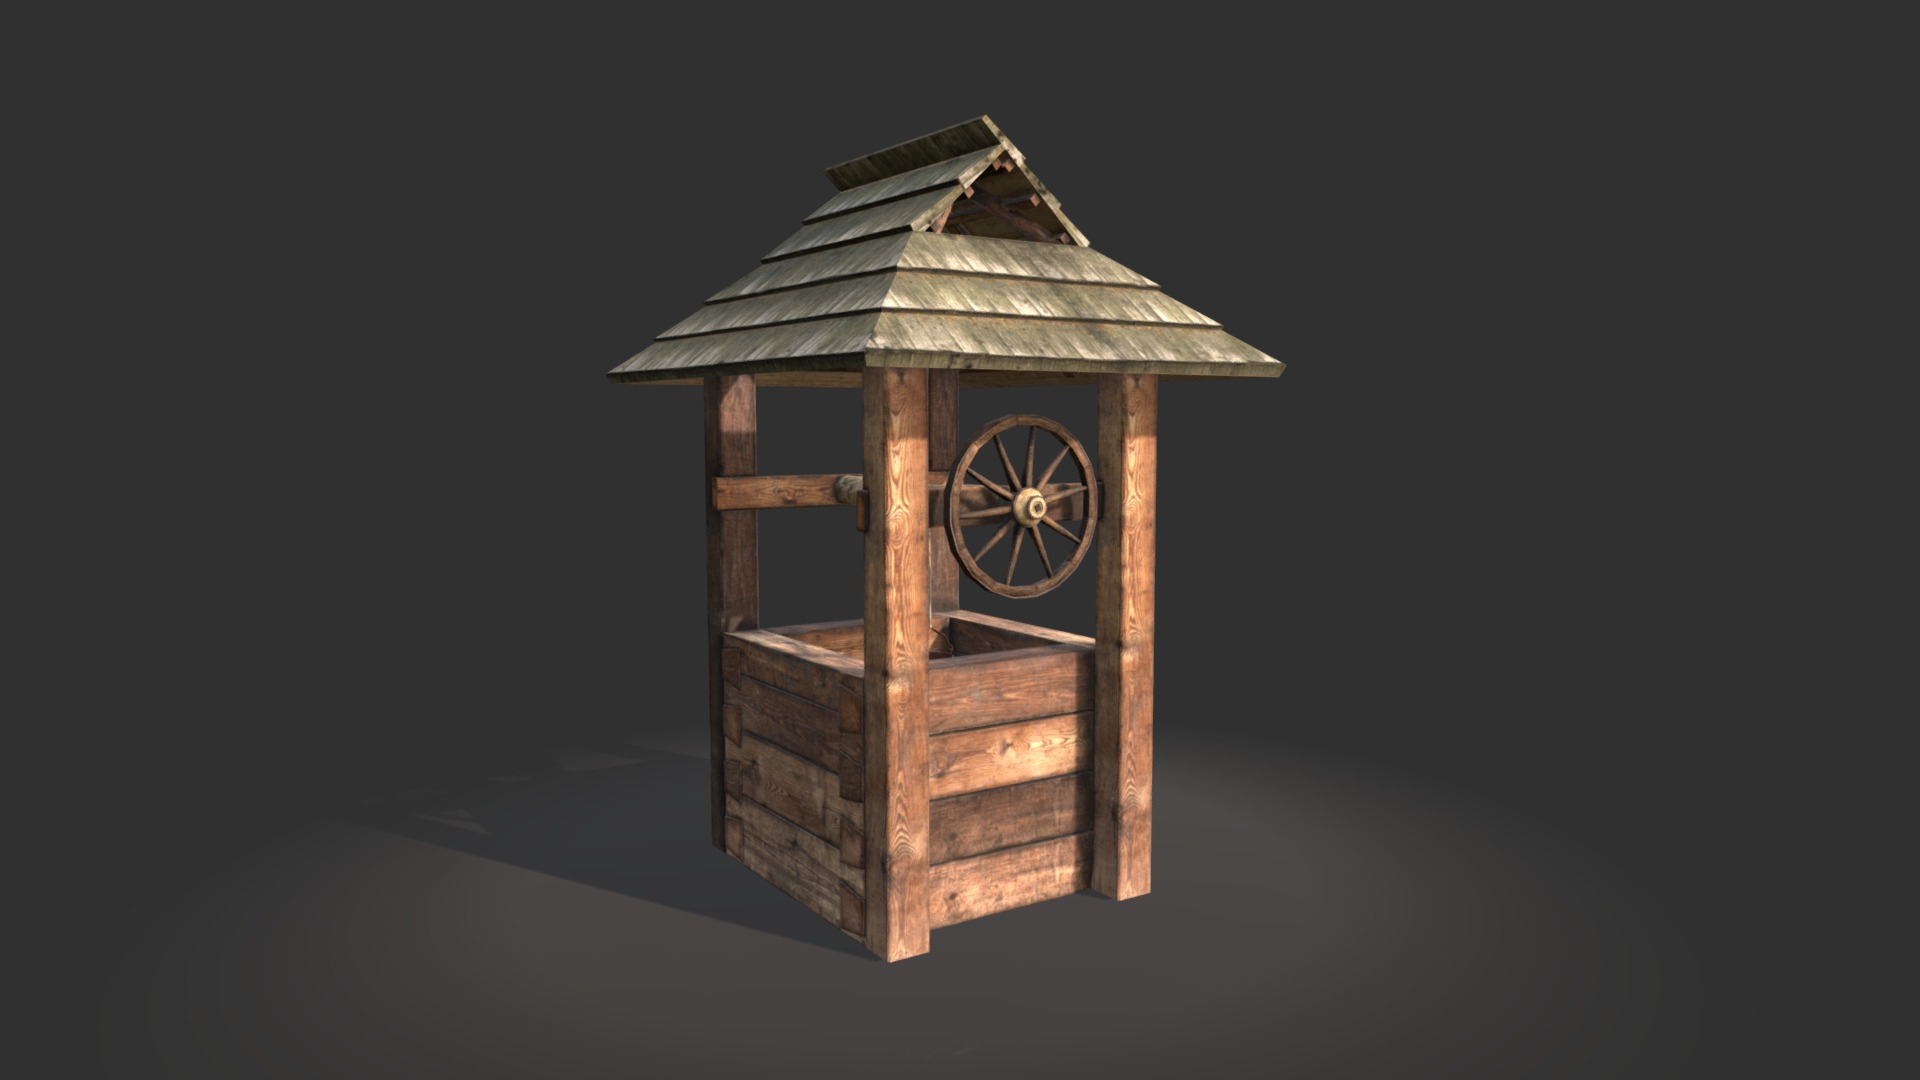 3D model Well – Slav Architecture - This is a 3D model of the Well - Slav Architecture. The 3D model is about a wooden clock tower.